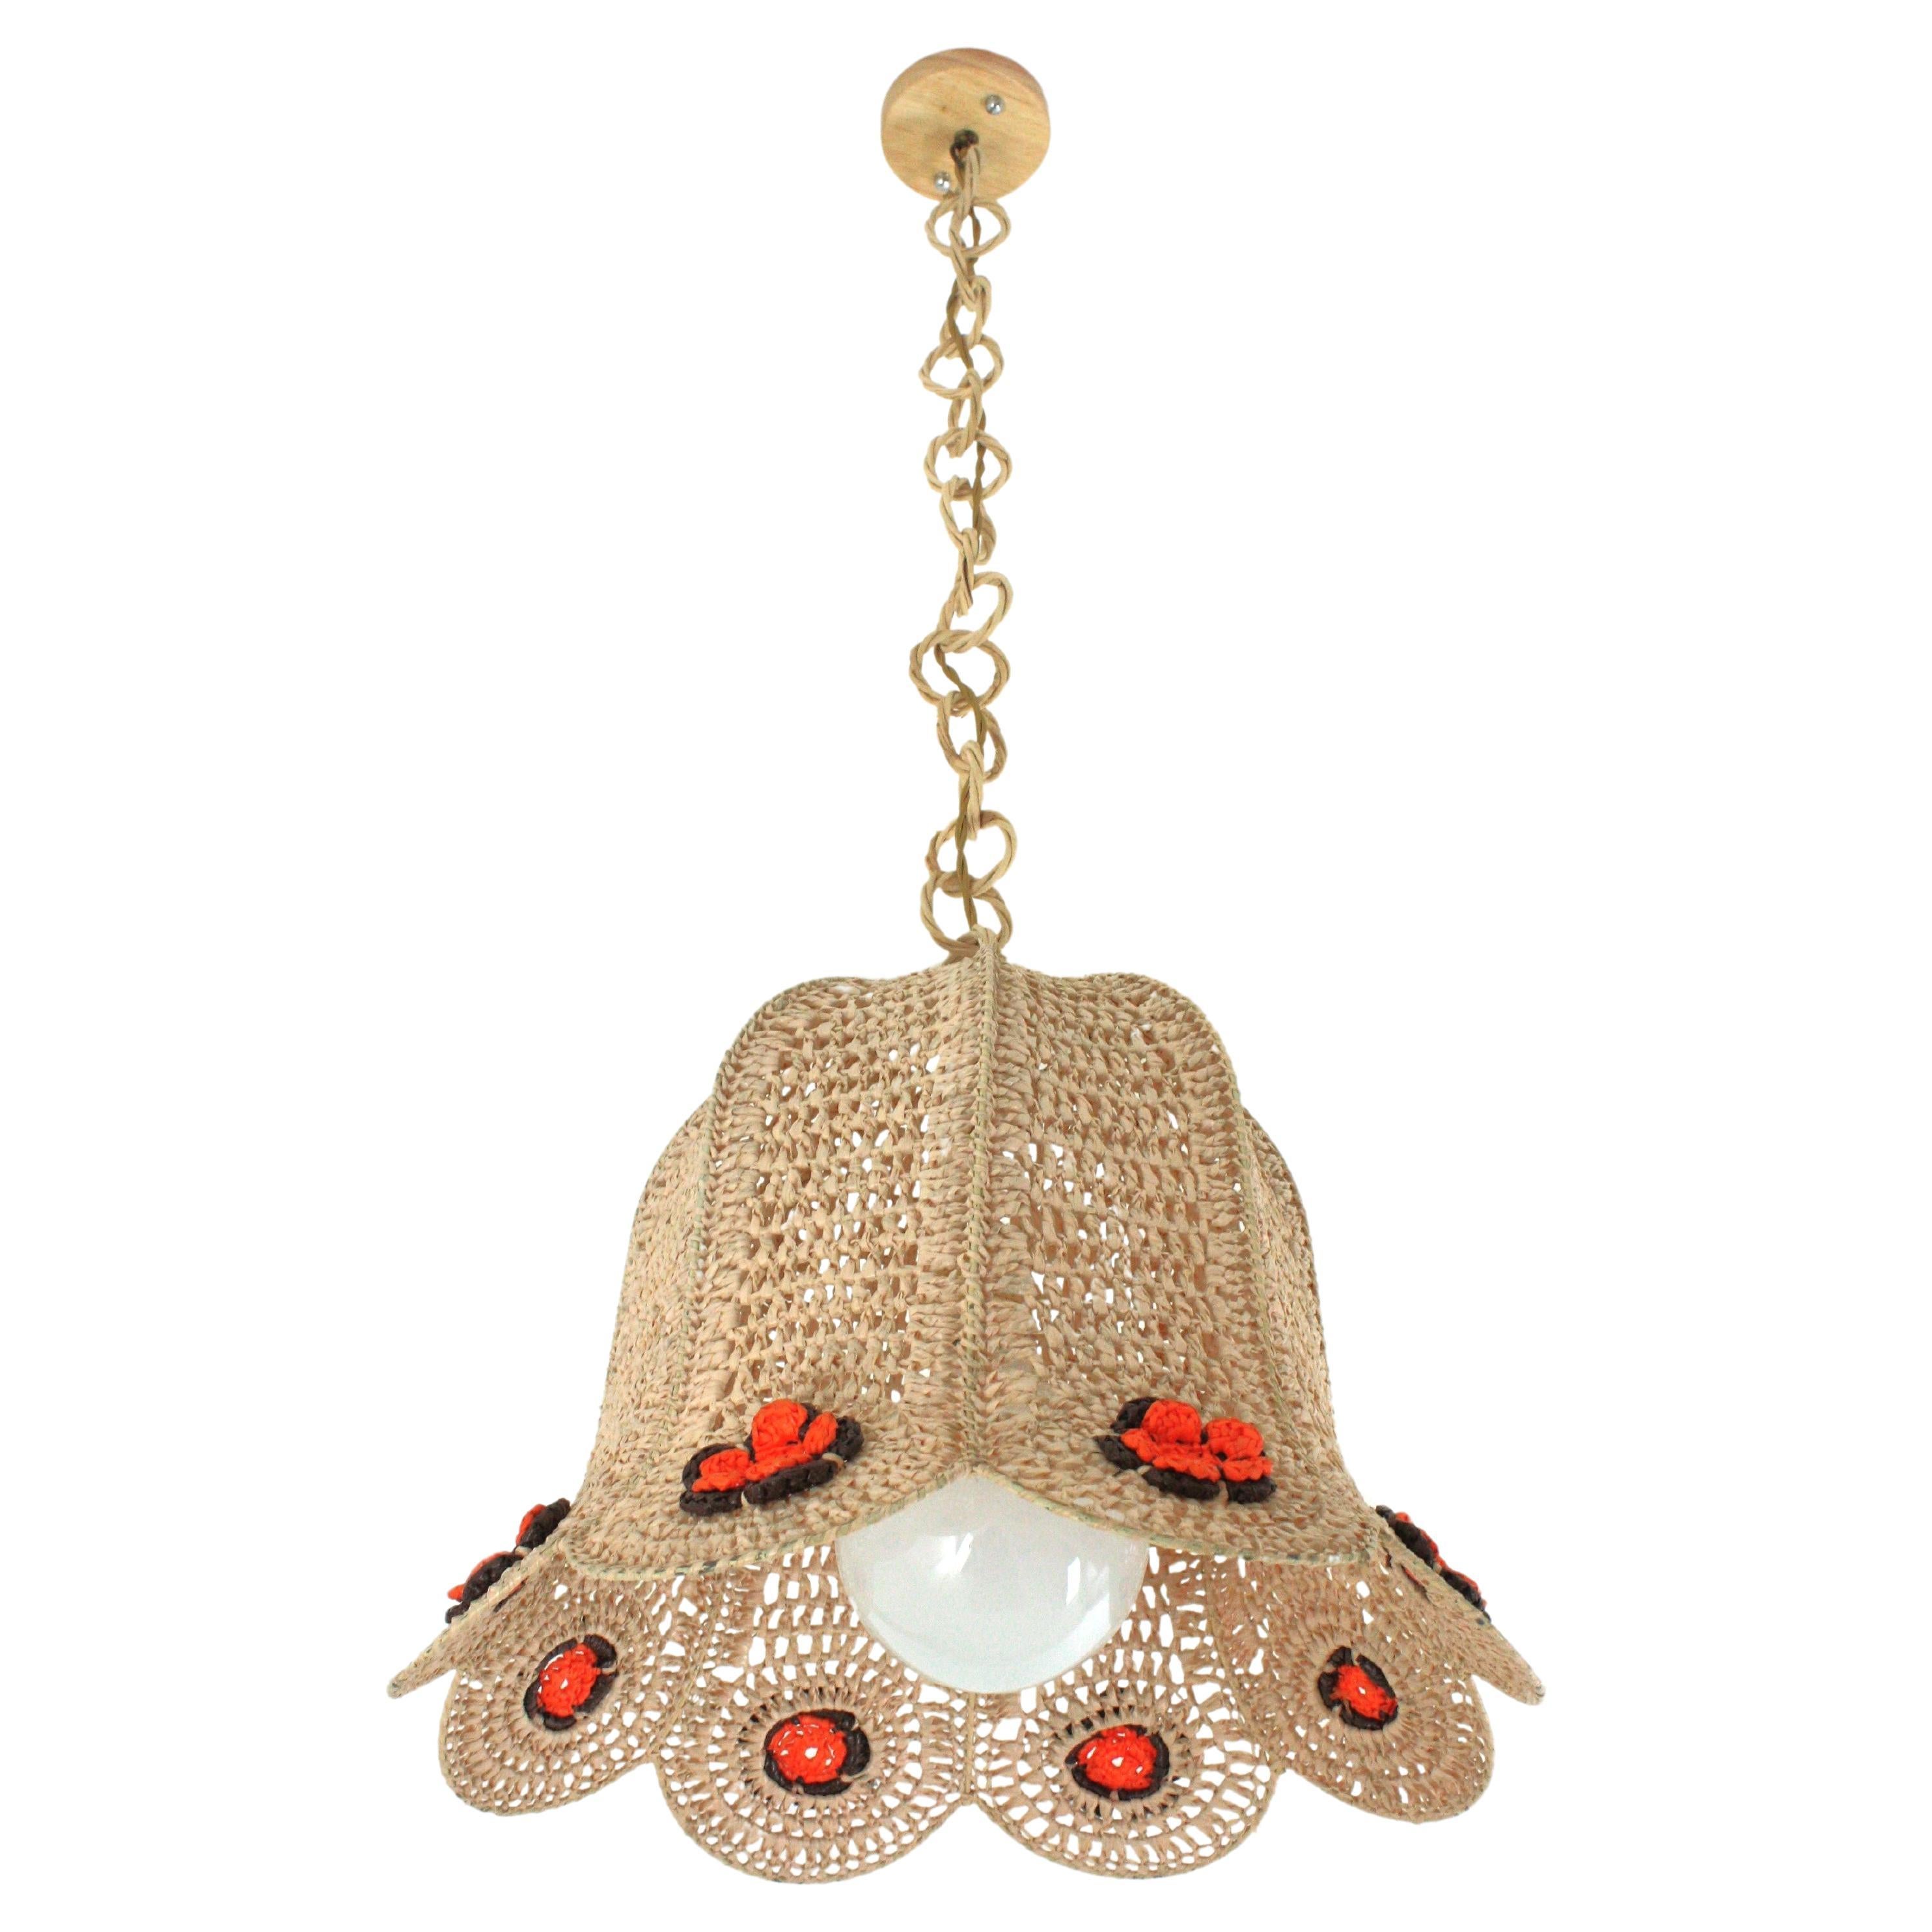 Scallop Bell Shaped Pendant Light in Acrylic Macrame and Rattan.
A funny Bohemian hand knotted macramé suspension lamp with colorful flowers accenting the bottom. Spain, 1960s-1970s.
This handcrafted chandelier features a lampshade made of hand